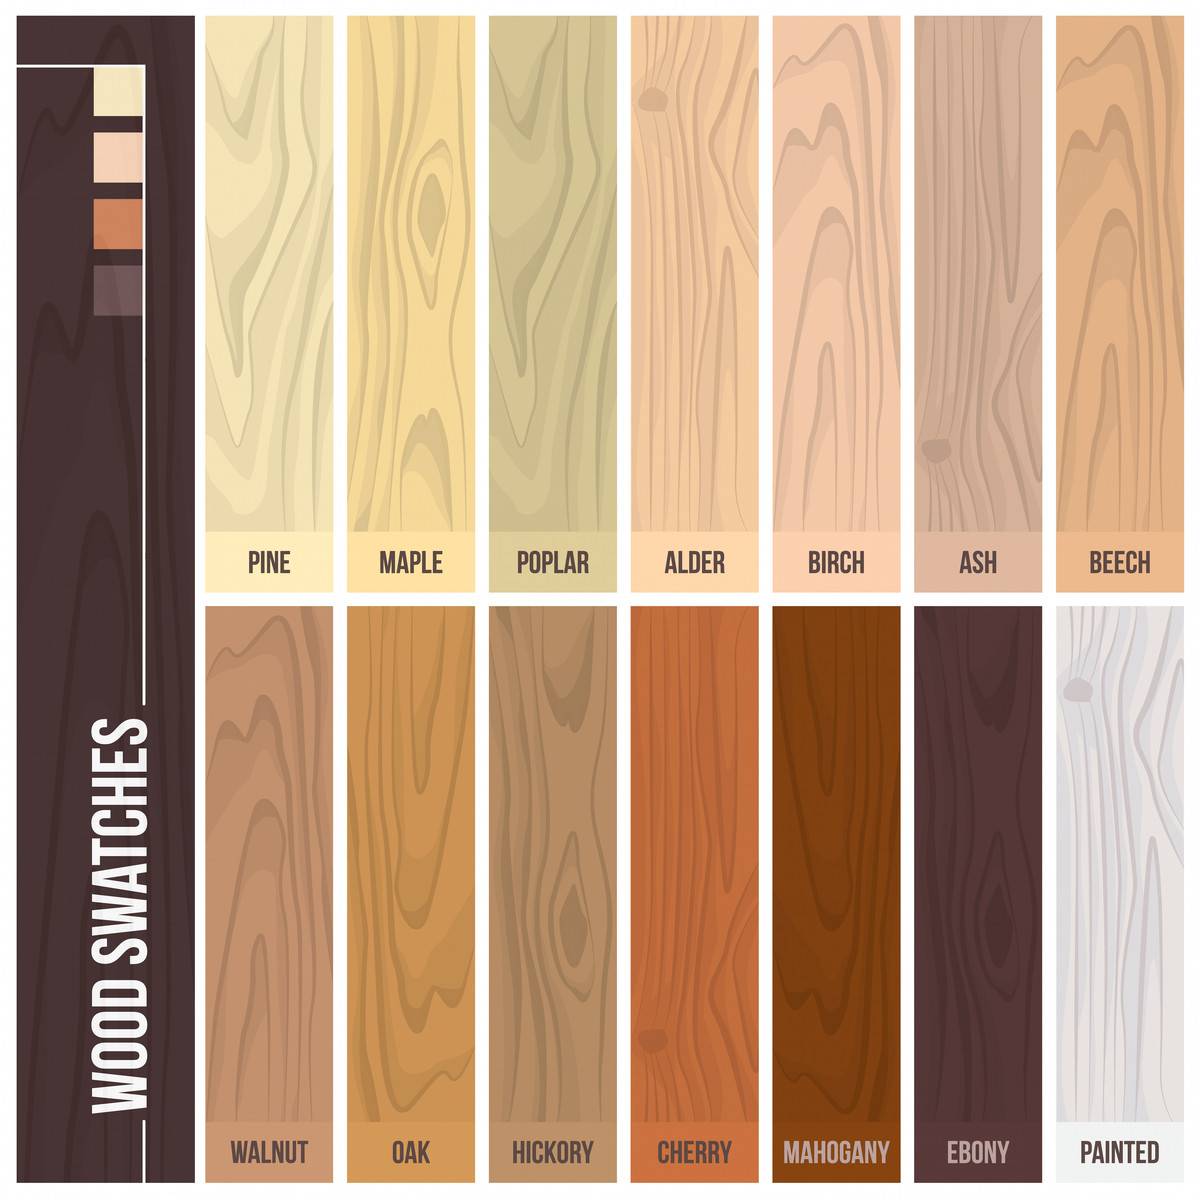 19 Spectacular Hardwood Flooring Square Foot Price 2024 free download hardwood flooring square foot price of 12 types of hardwood flooring species styles edging dimensions intended for types of hardwood flooring illustrated guide